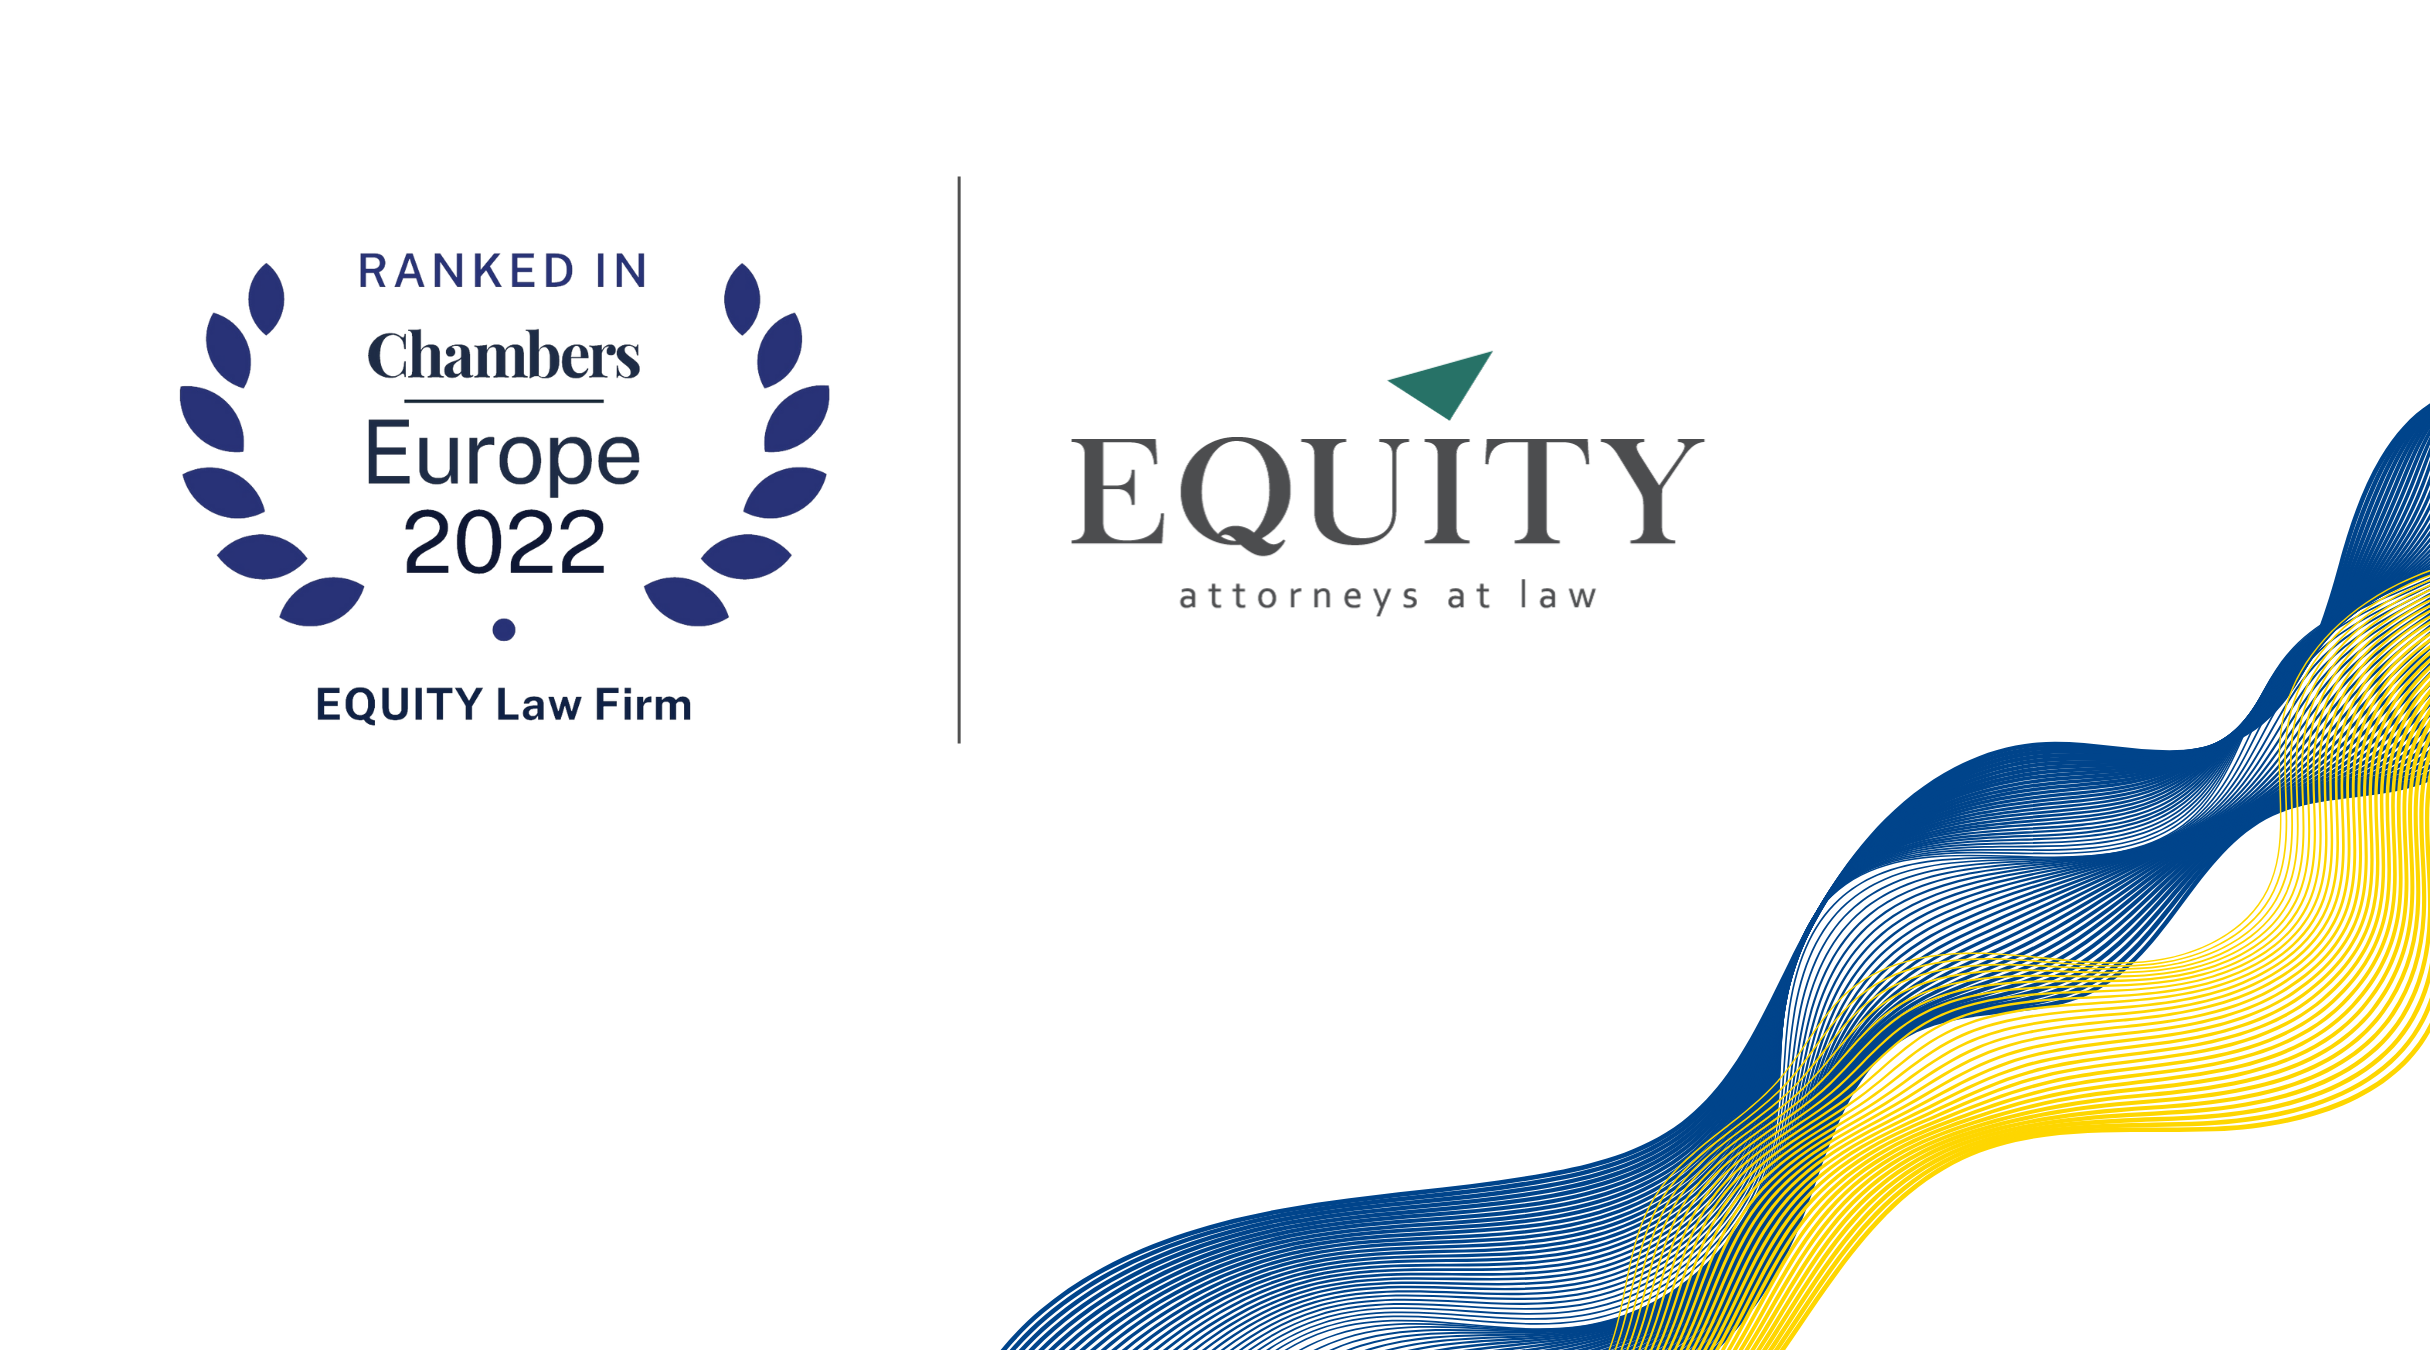 EQUITY is recognized by the Chambers Europe 2022 directory